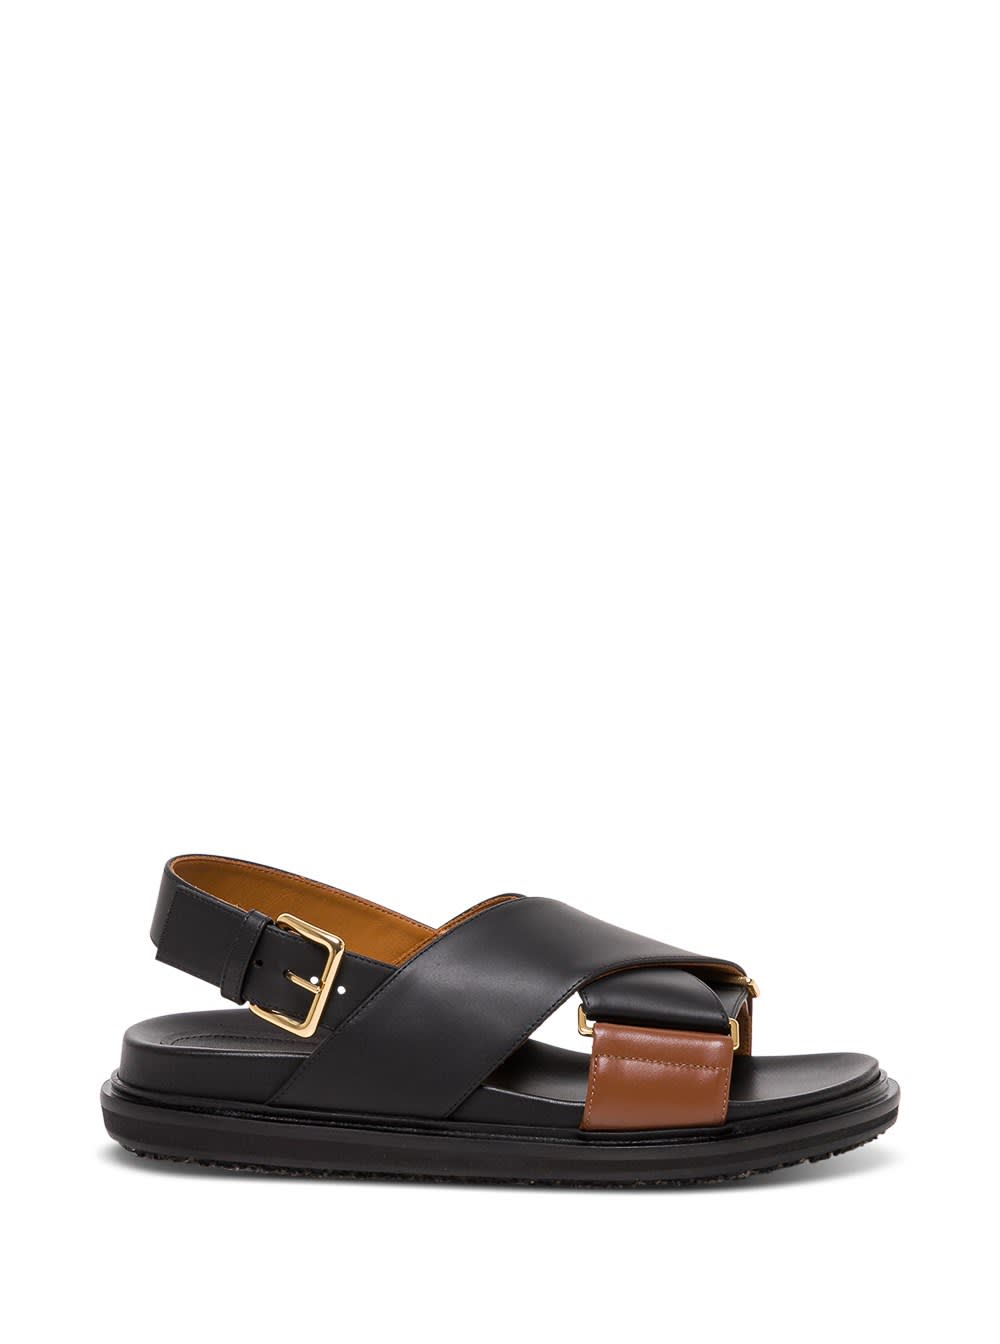 Buy Marni Crossed Sandals In Bicolor Leather online, shop Marni shoes with free shipping